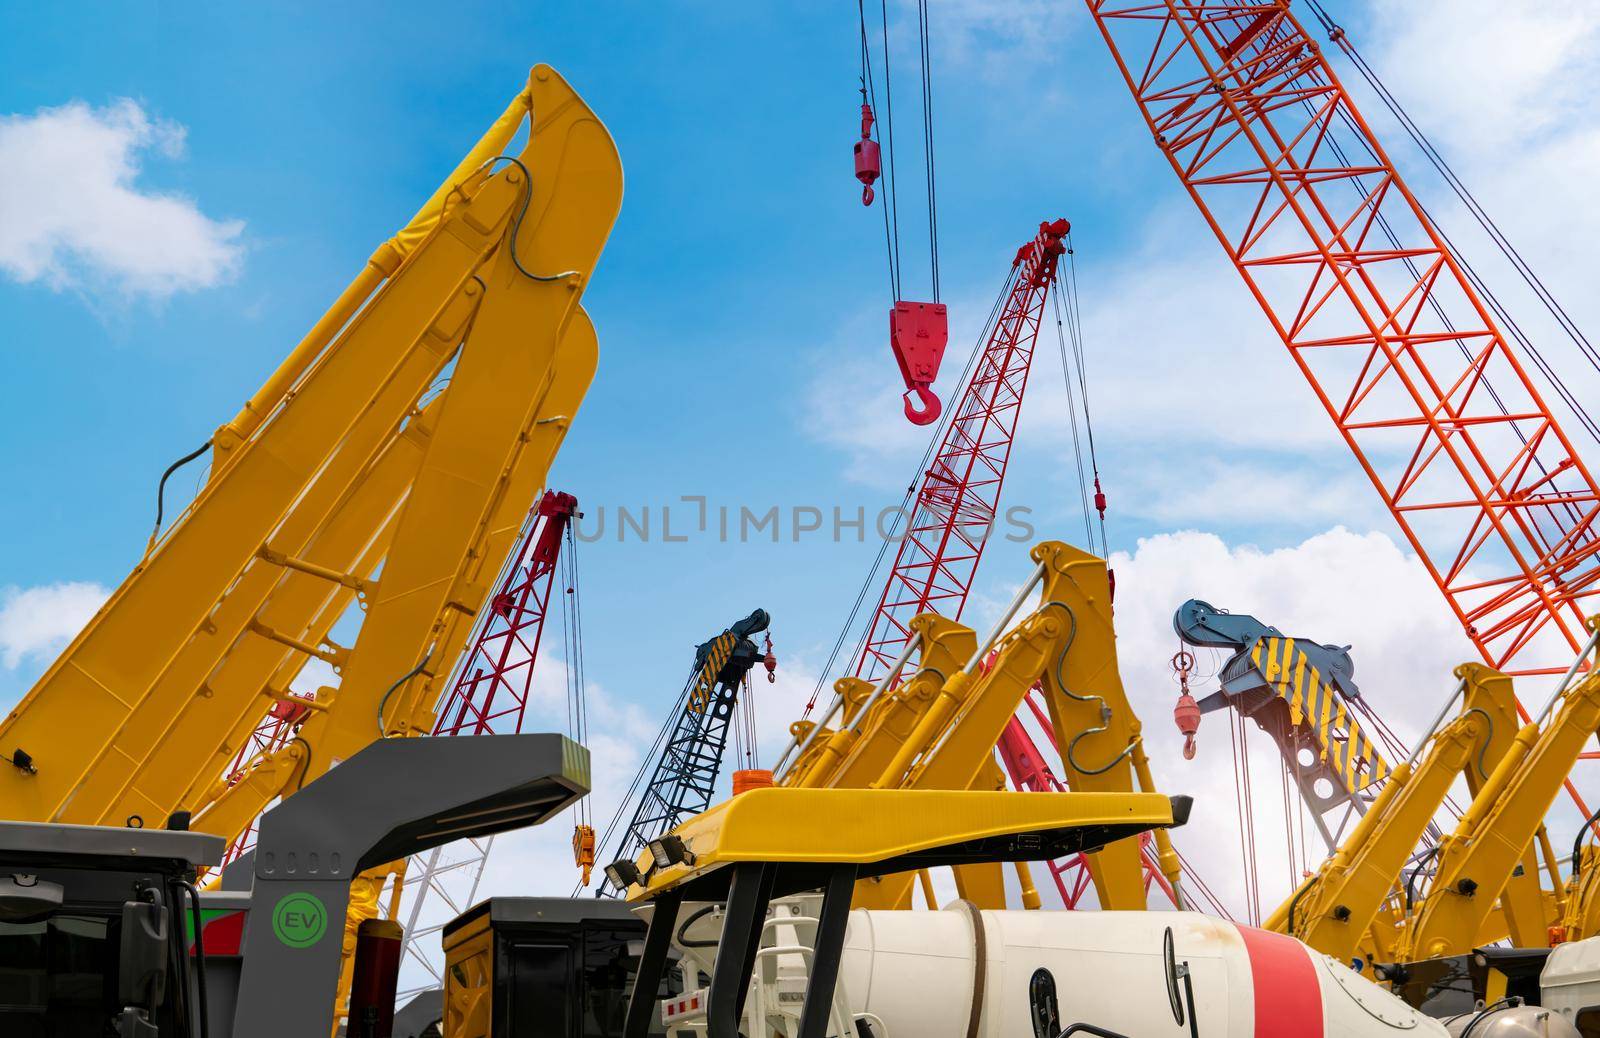 Crawler crane against blue sky. Real estate industry. Red crawler crane use reel lift up equipment in construction site. Crane for rent at parking lot. Crane dealership for construction business.